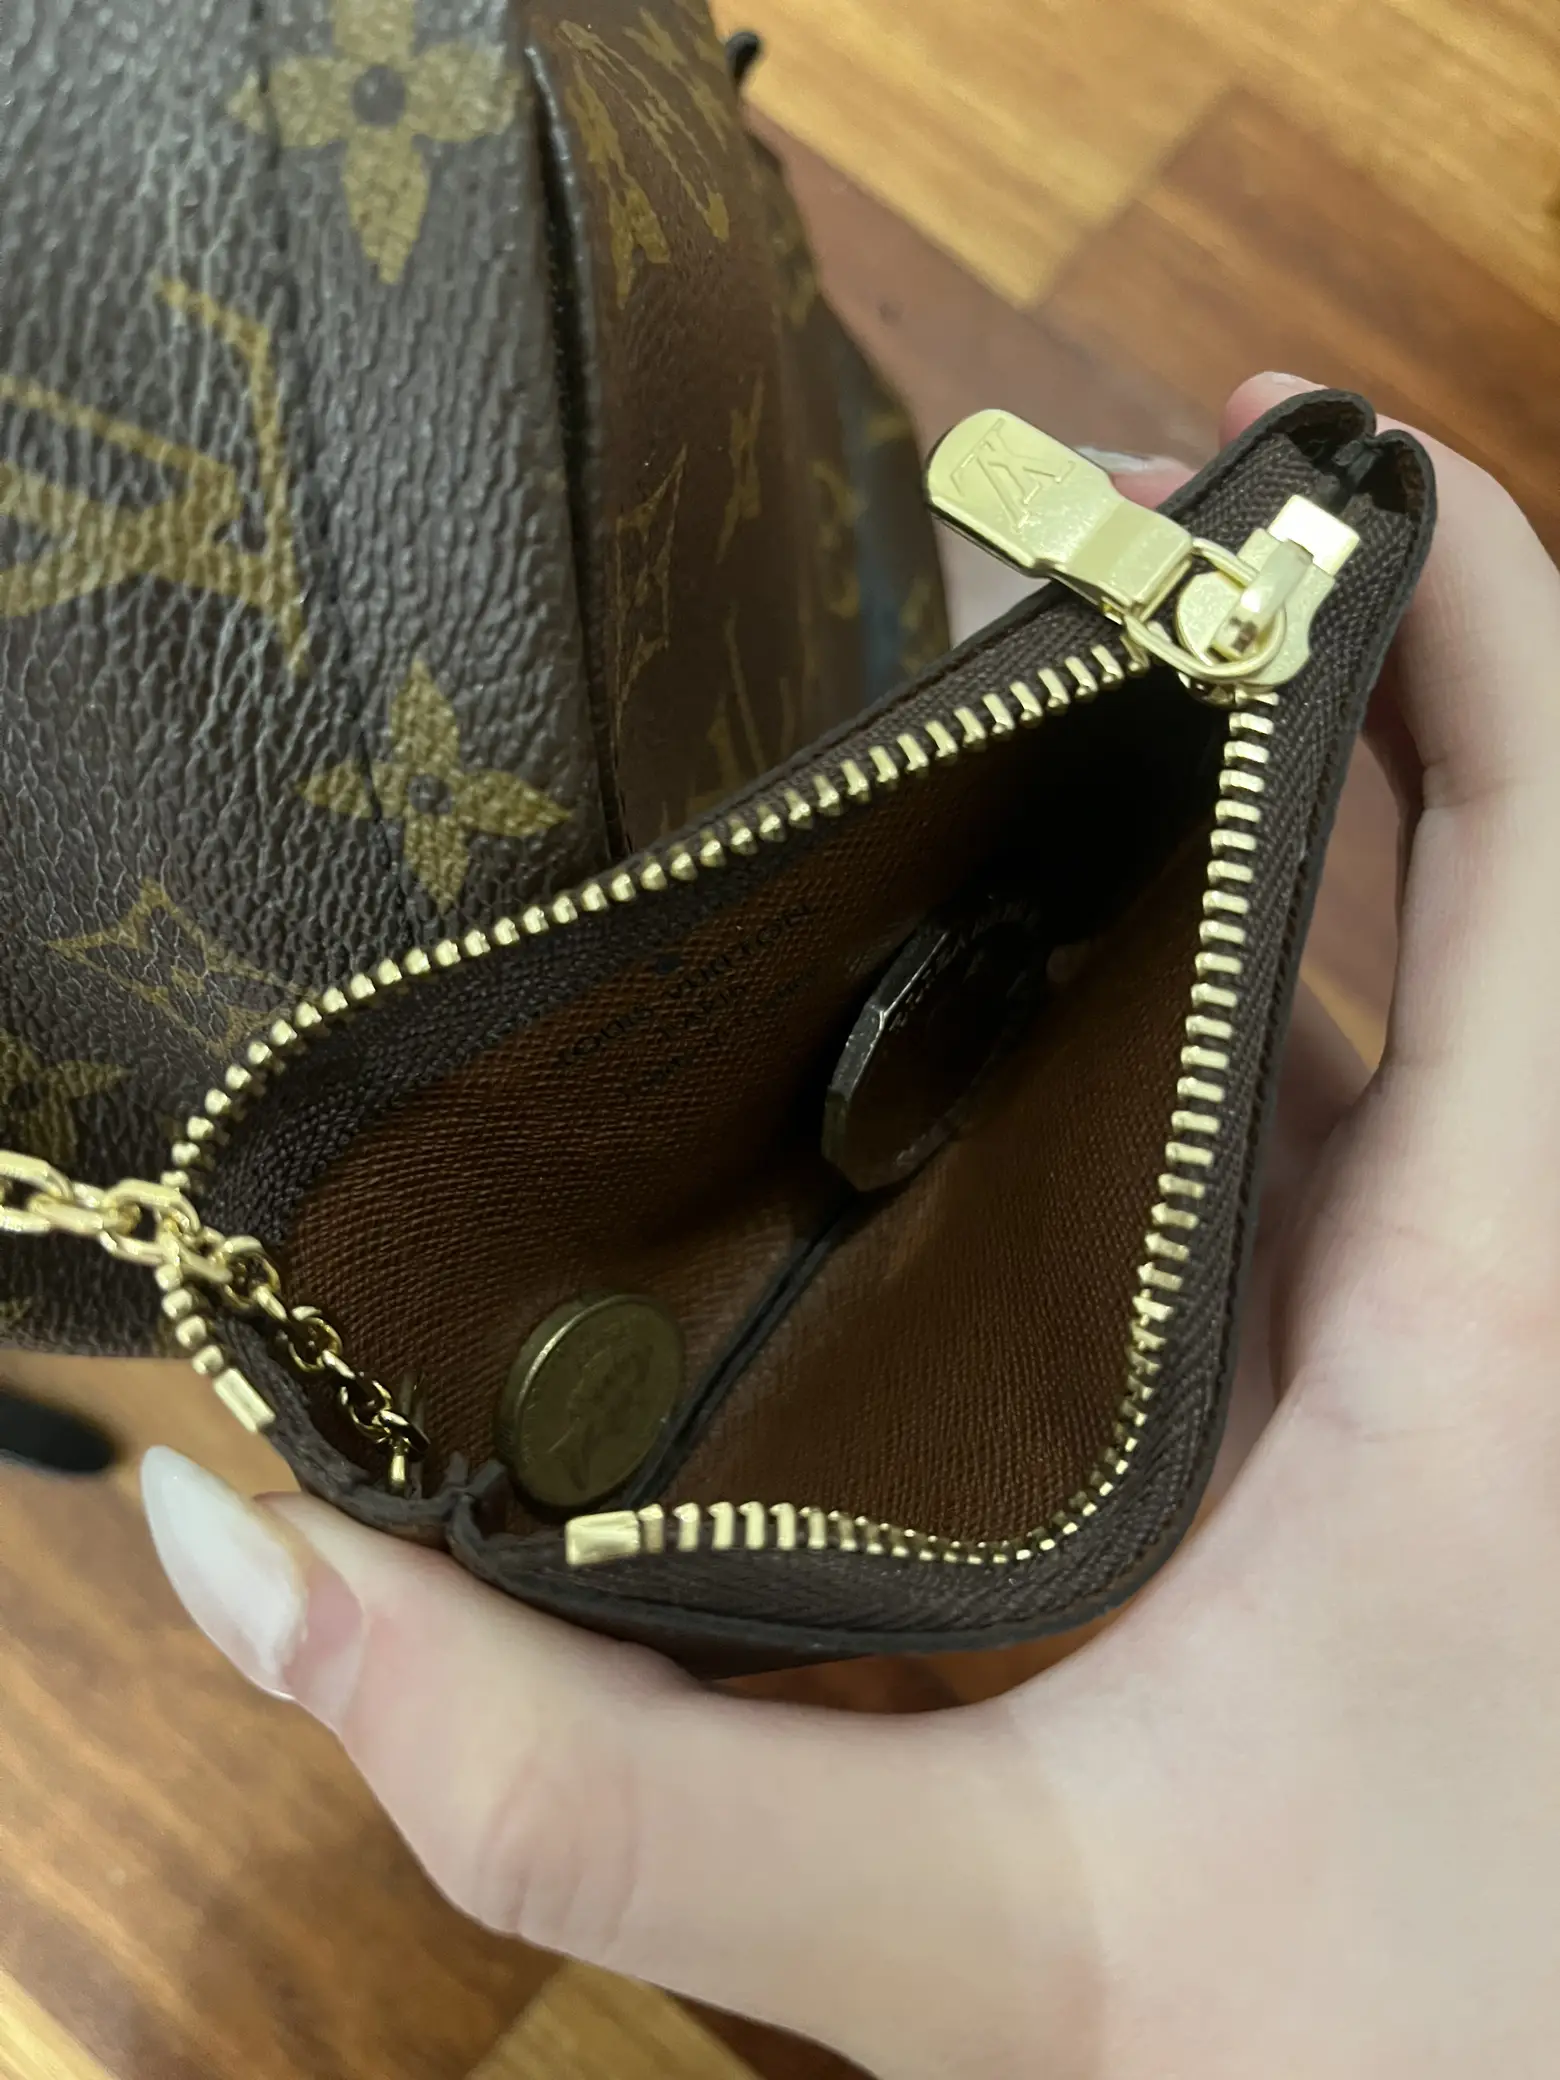 HighendSociety Affordable Louis Vuitton Bag?